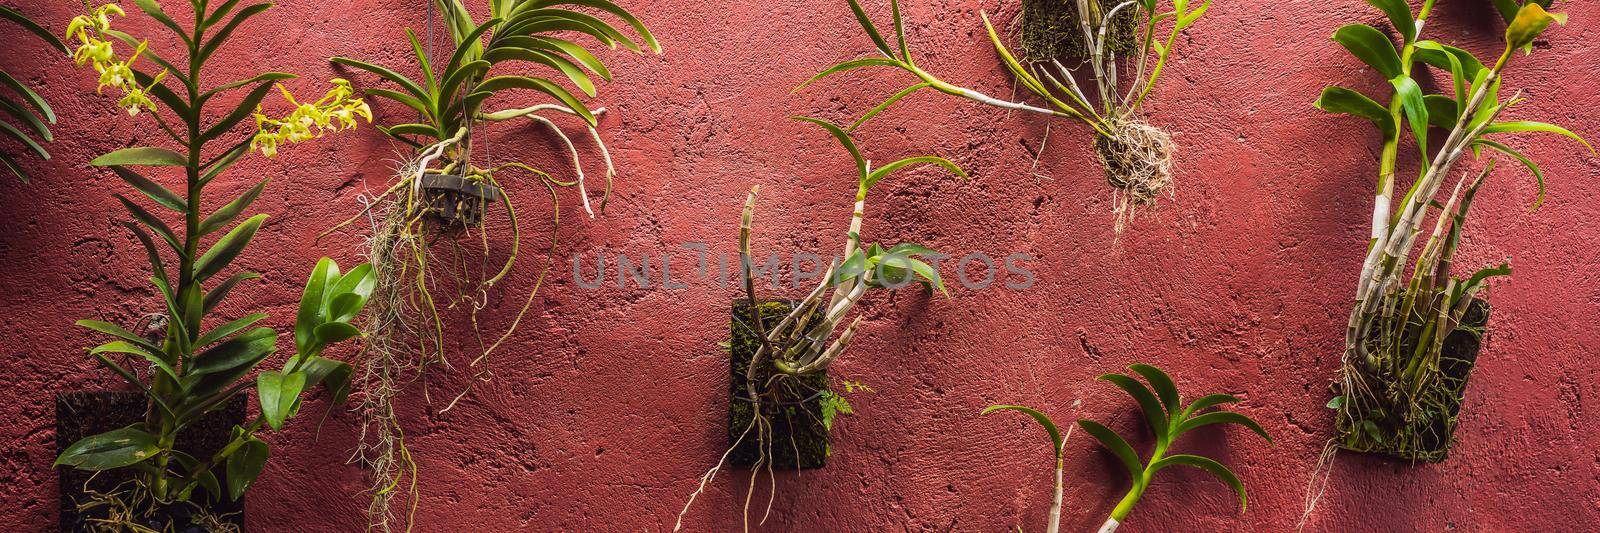 Different plants in pots on a red painted wall BANNER, LONG FORMAT by galitskaya